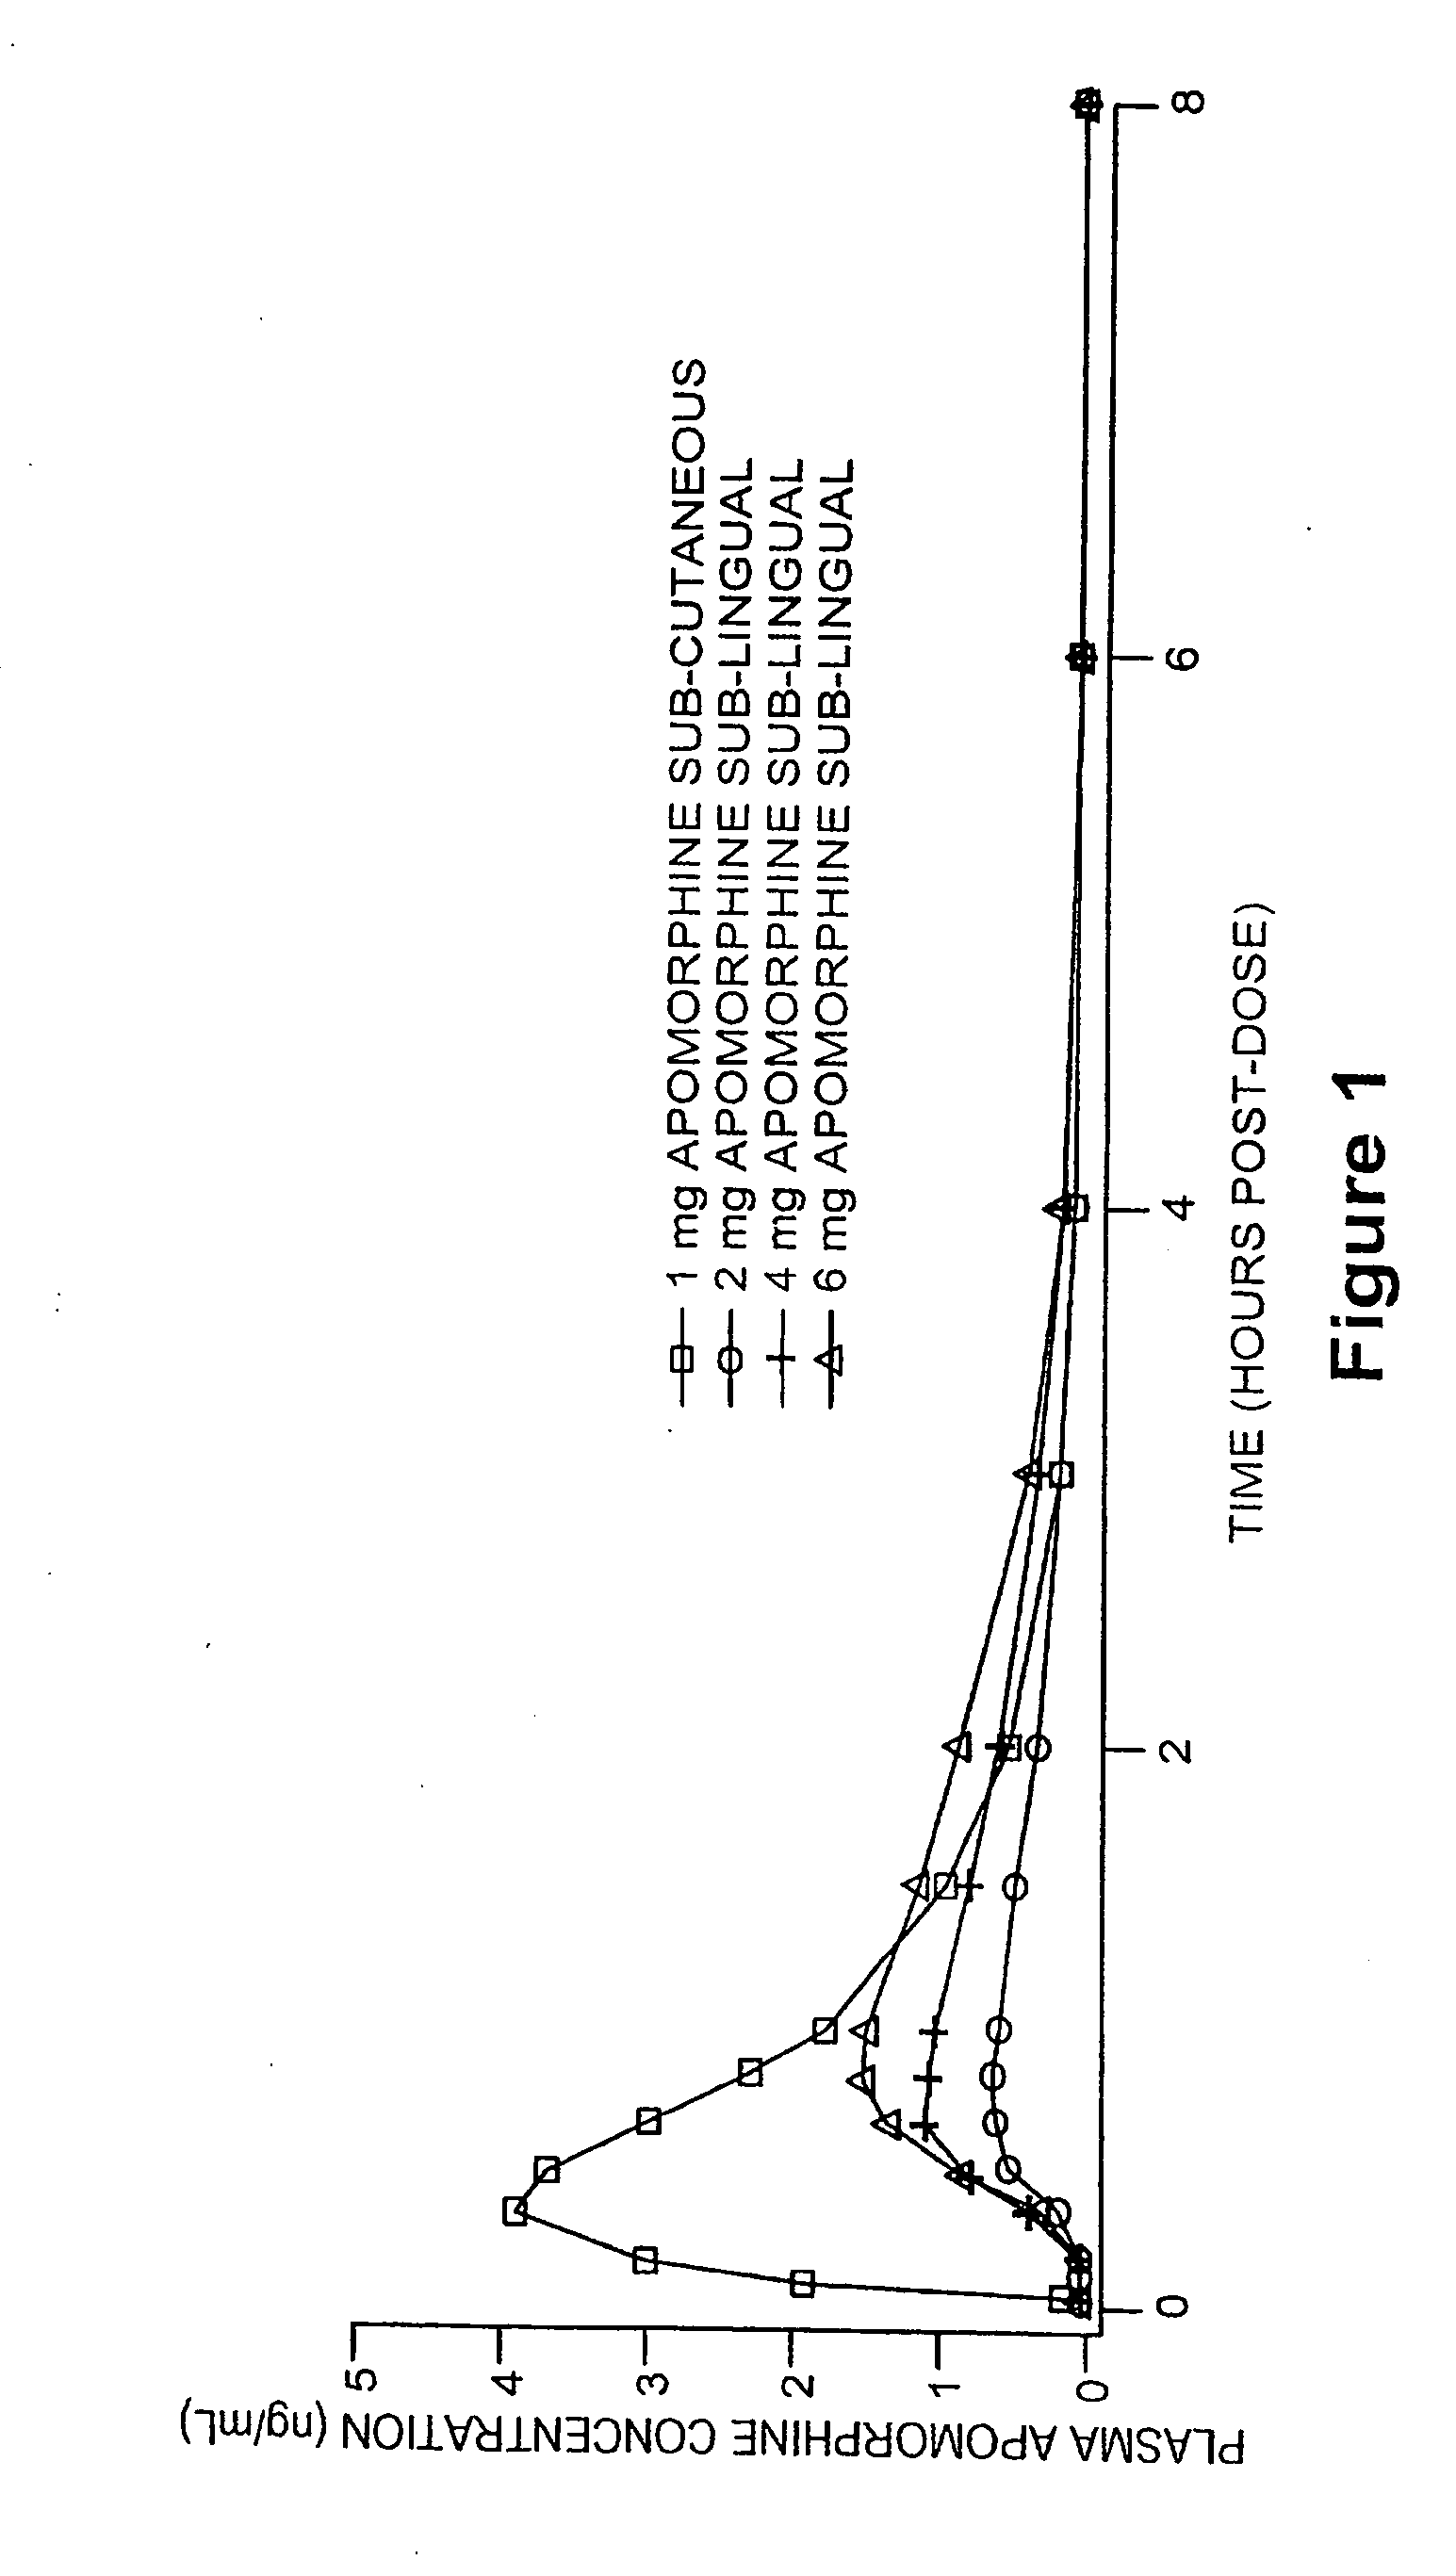 Method for the normalization of sexual response and amelioration of long term genital tissue degradation